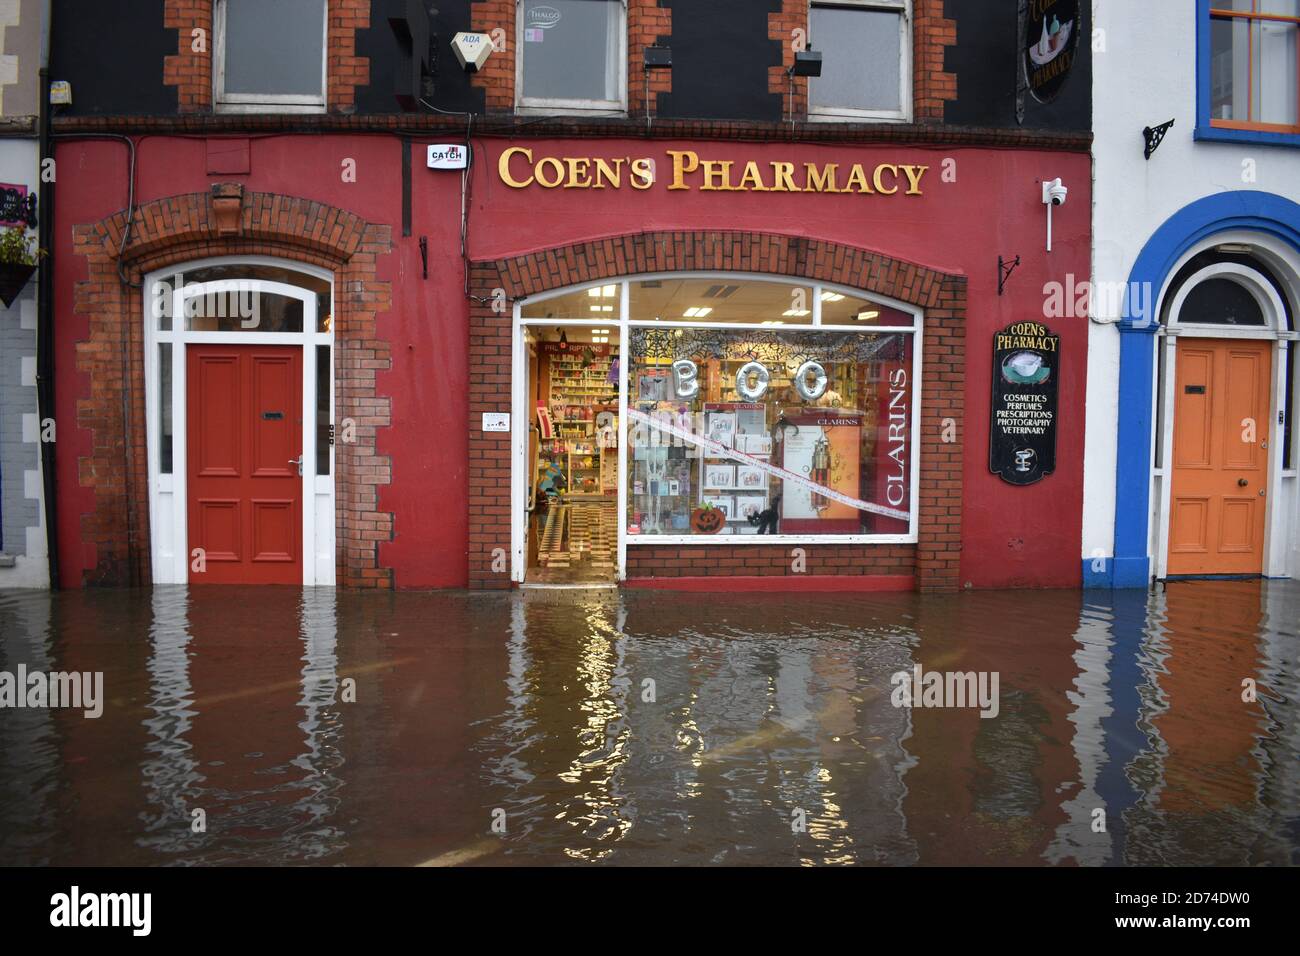 25 businesses we're effected by flooding in Wolfe Tone Square, Town lots, Bantry, West Cork, Ireland Stock Photo